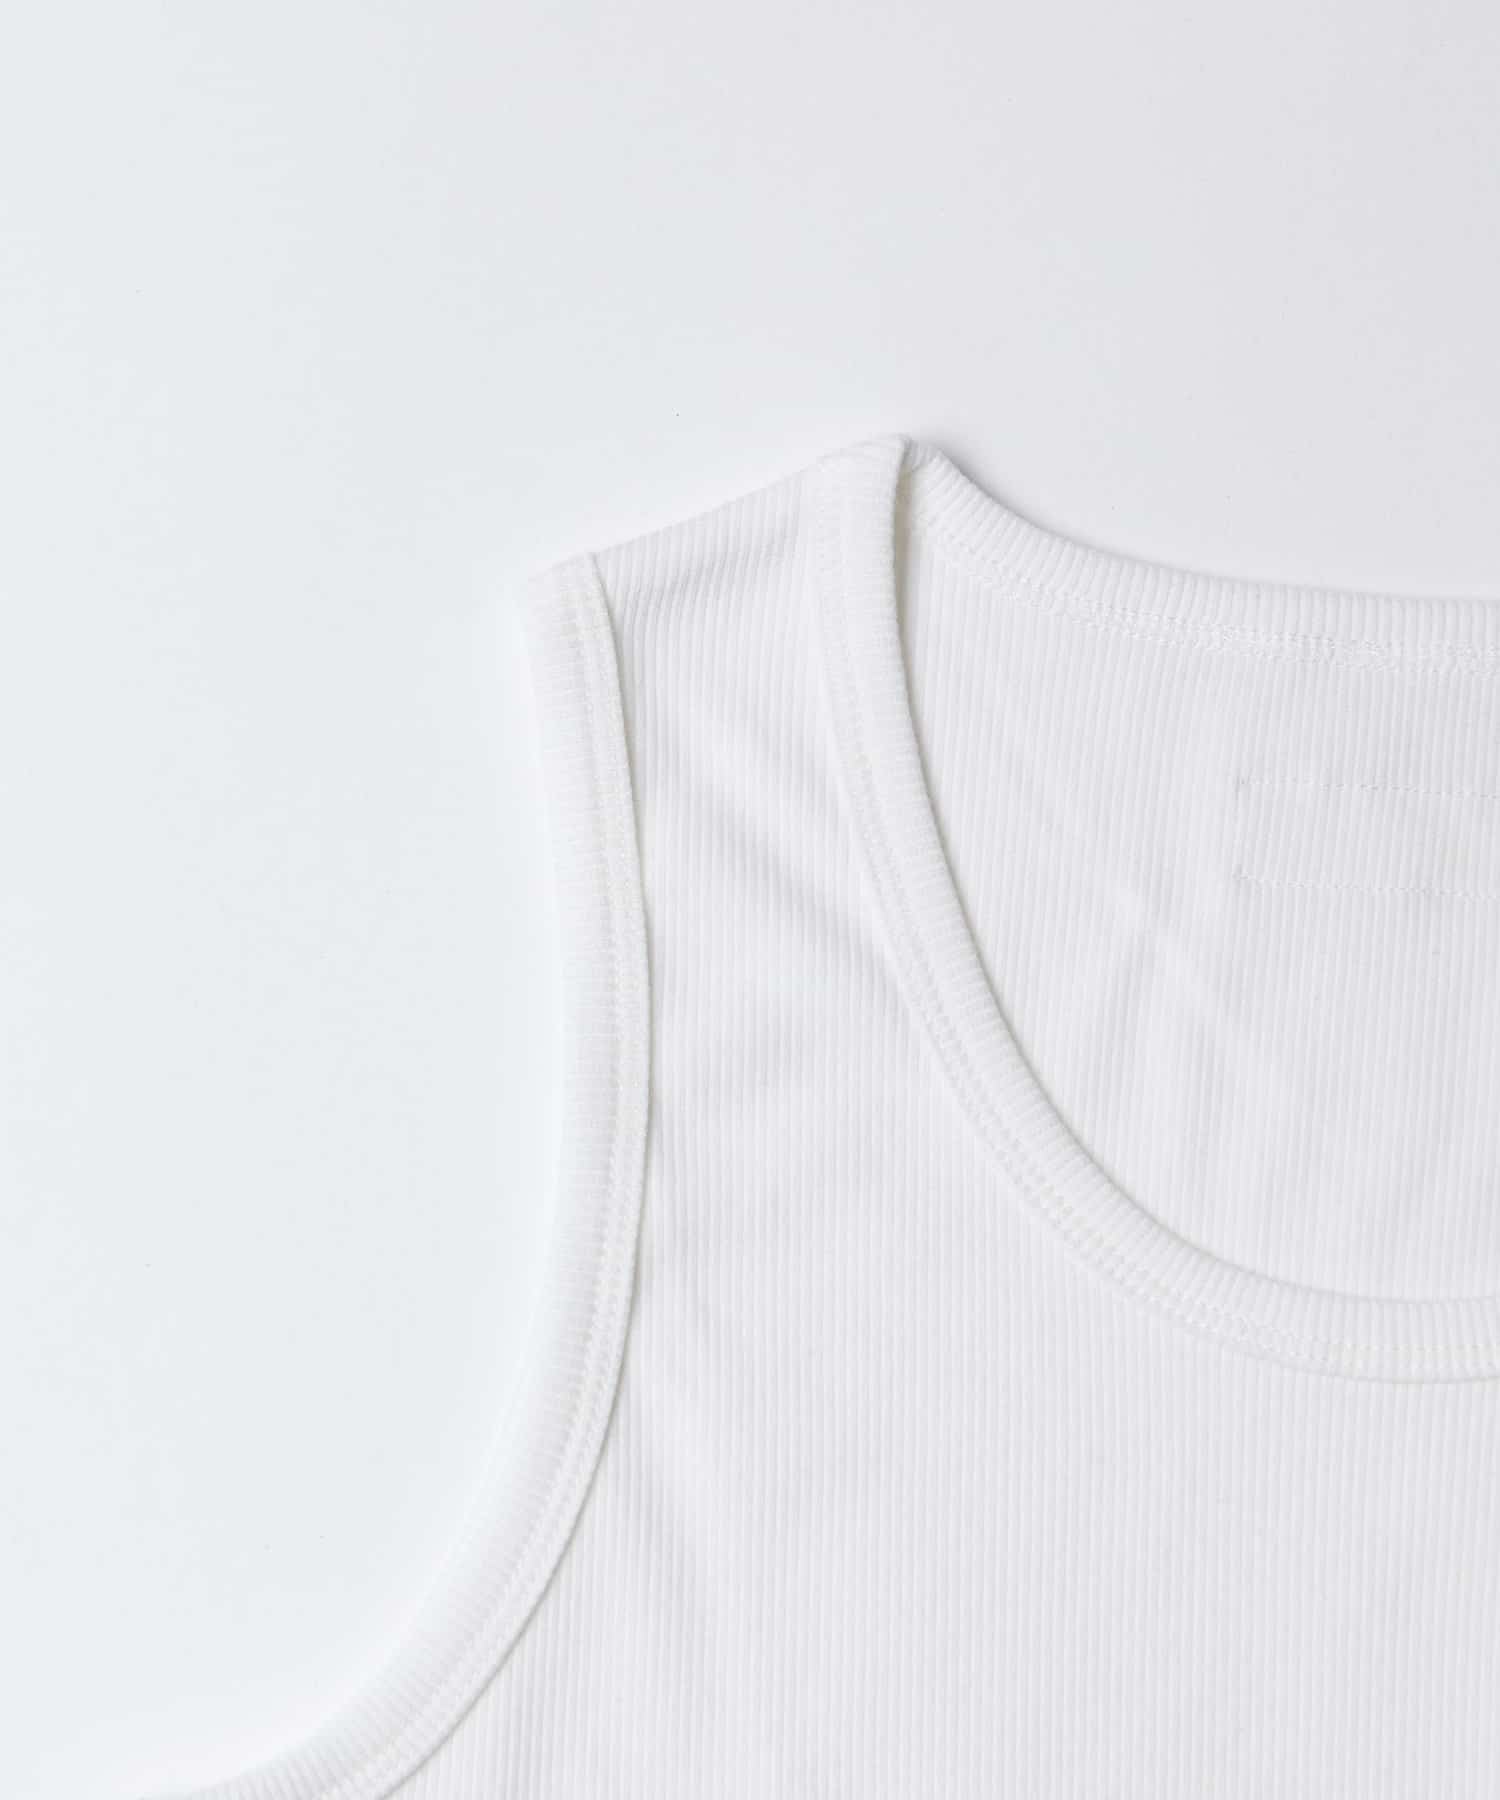 Lui's(ルイス) Ah for Lui's / for TANKTOP (タンクトップ)